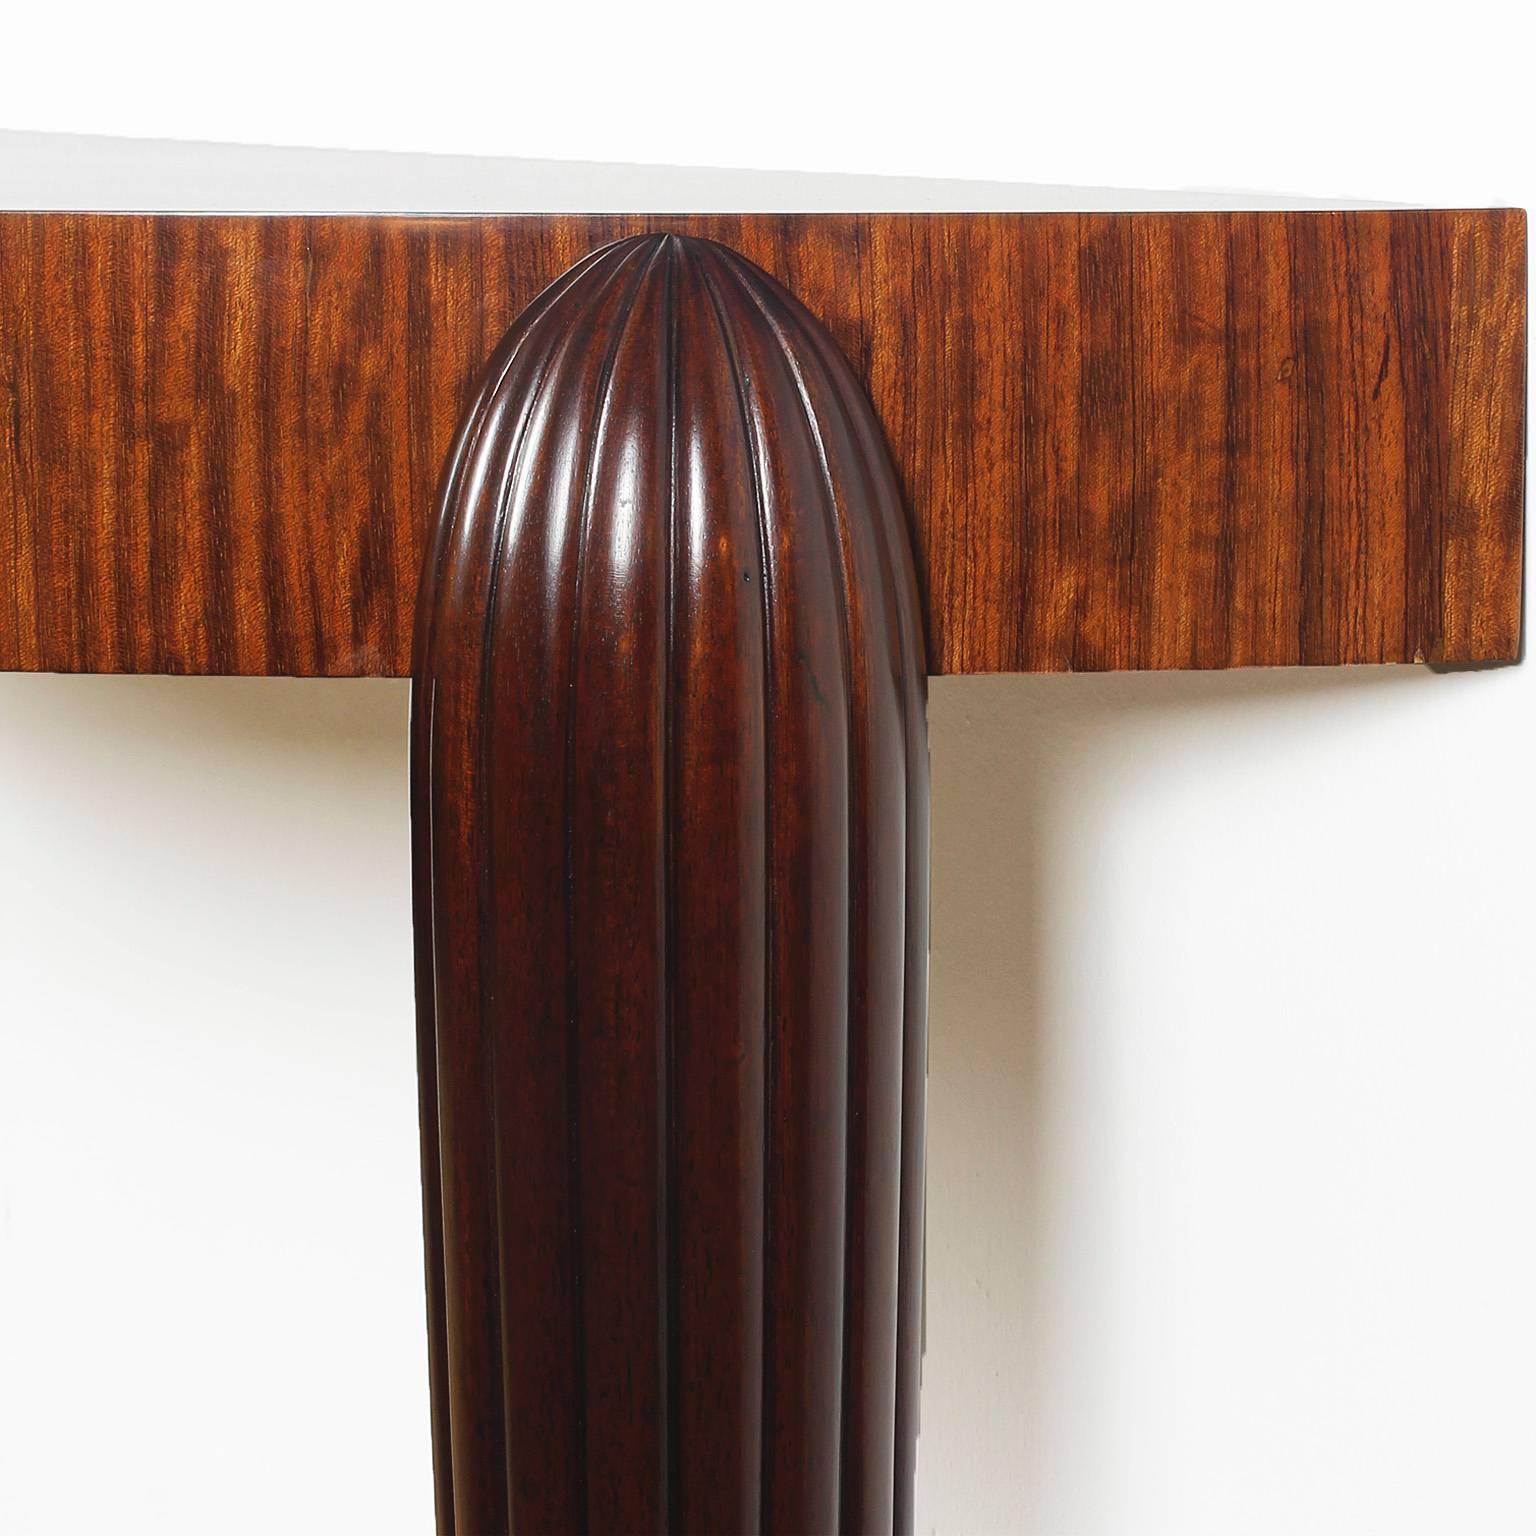 Early 20th Century 1925 - Art Deco Console, mahogany, rosewood, sycamore - France